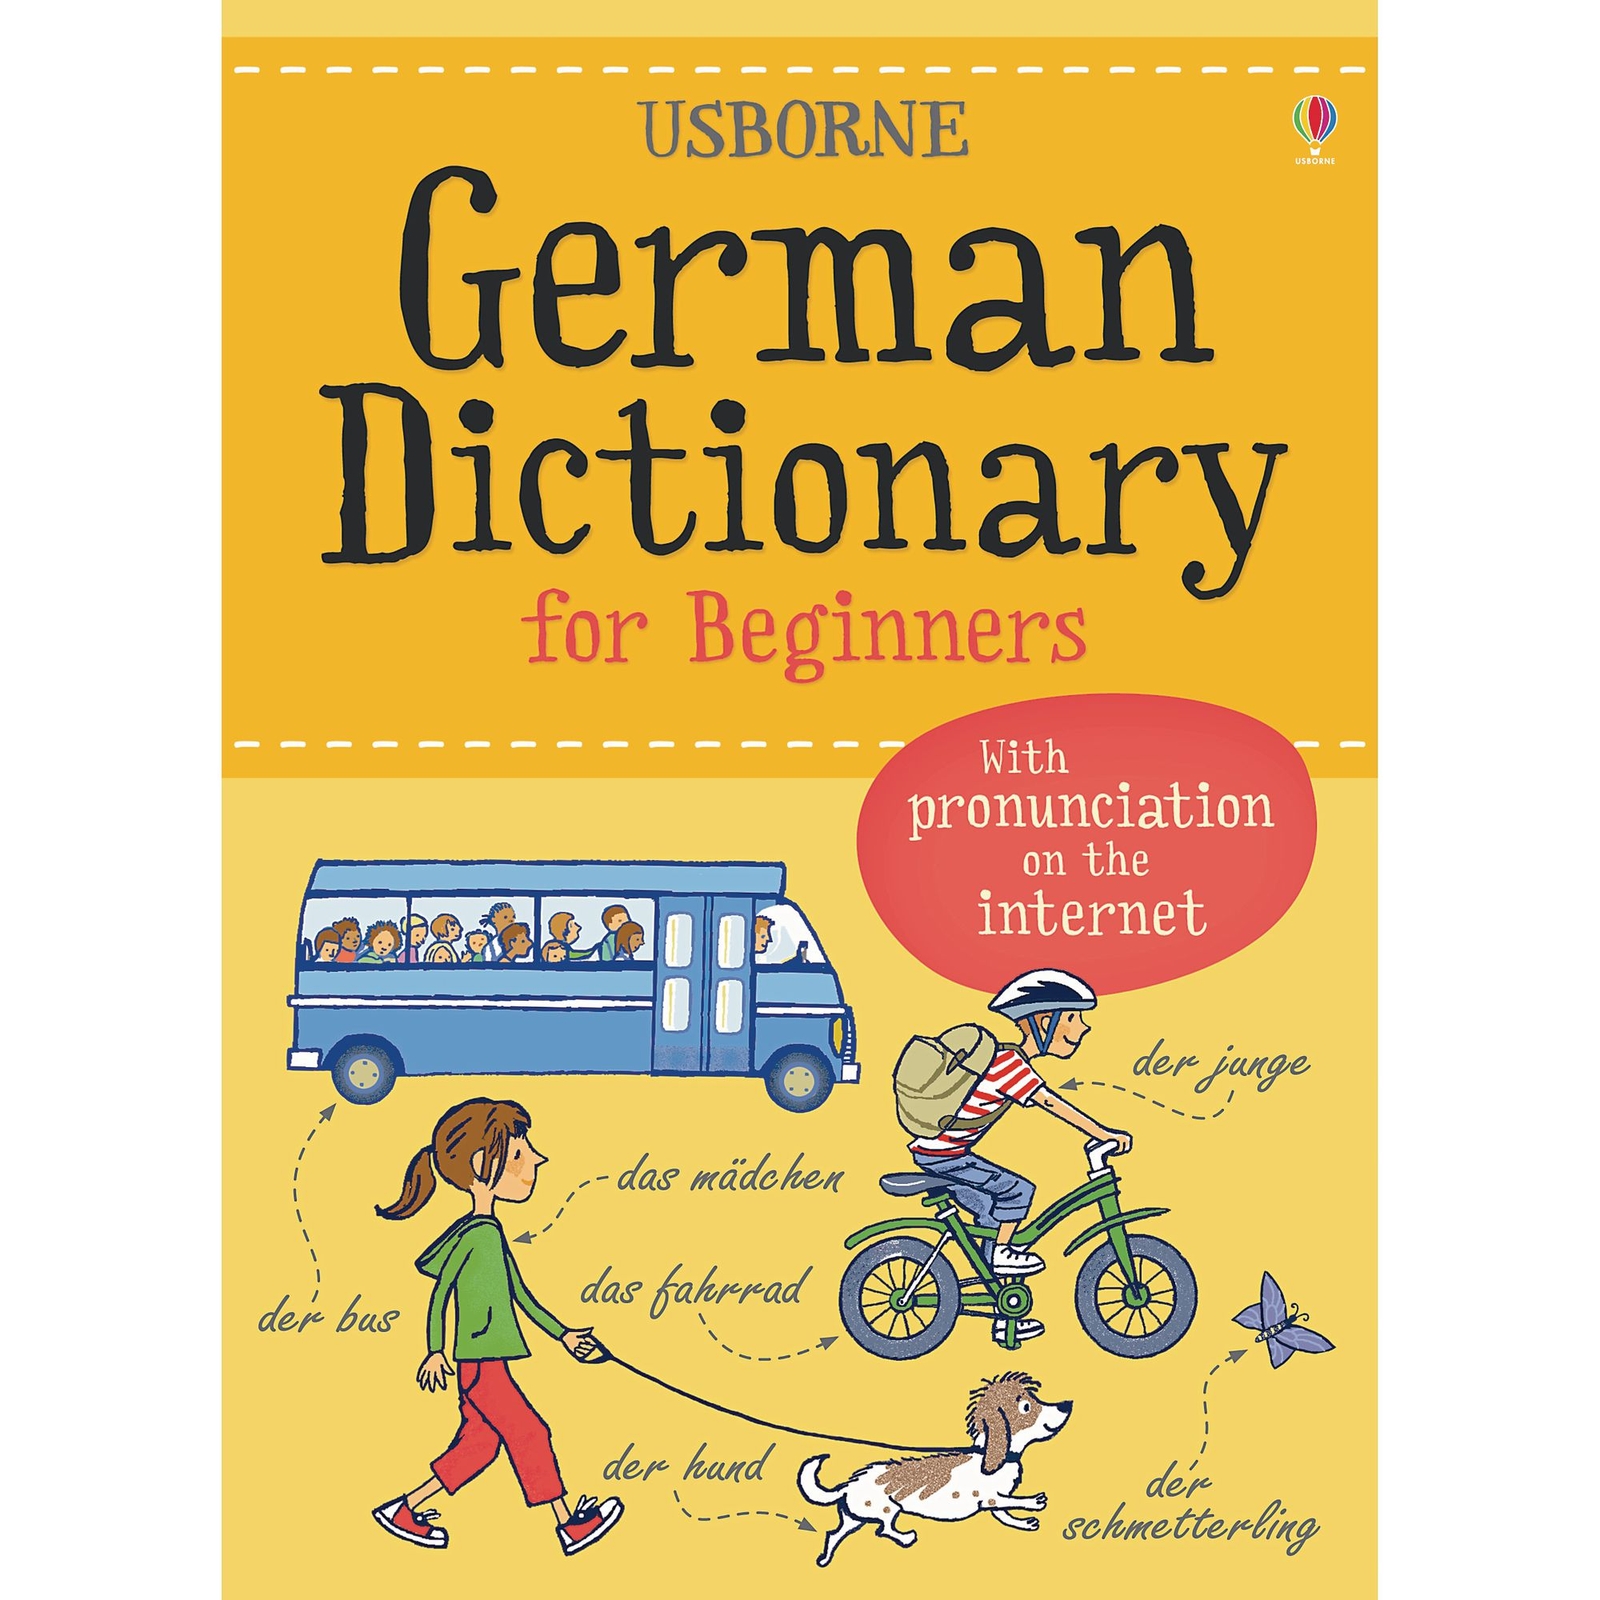 German Dictionary for Beginners